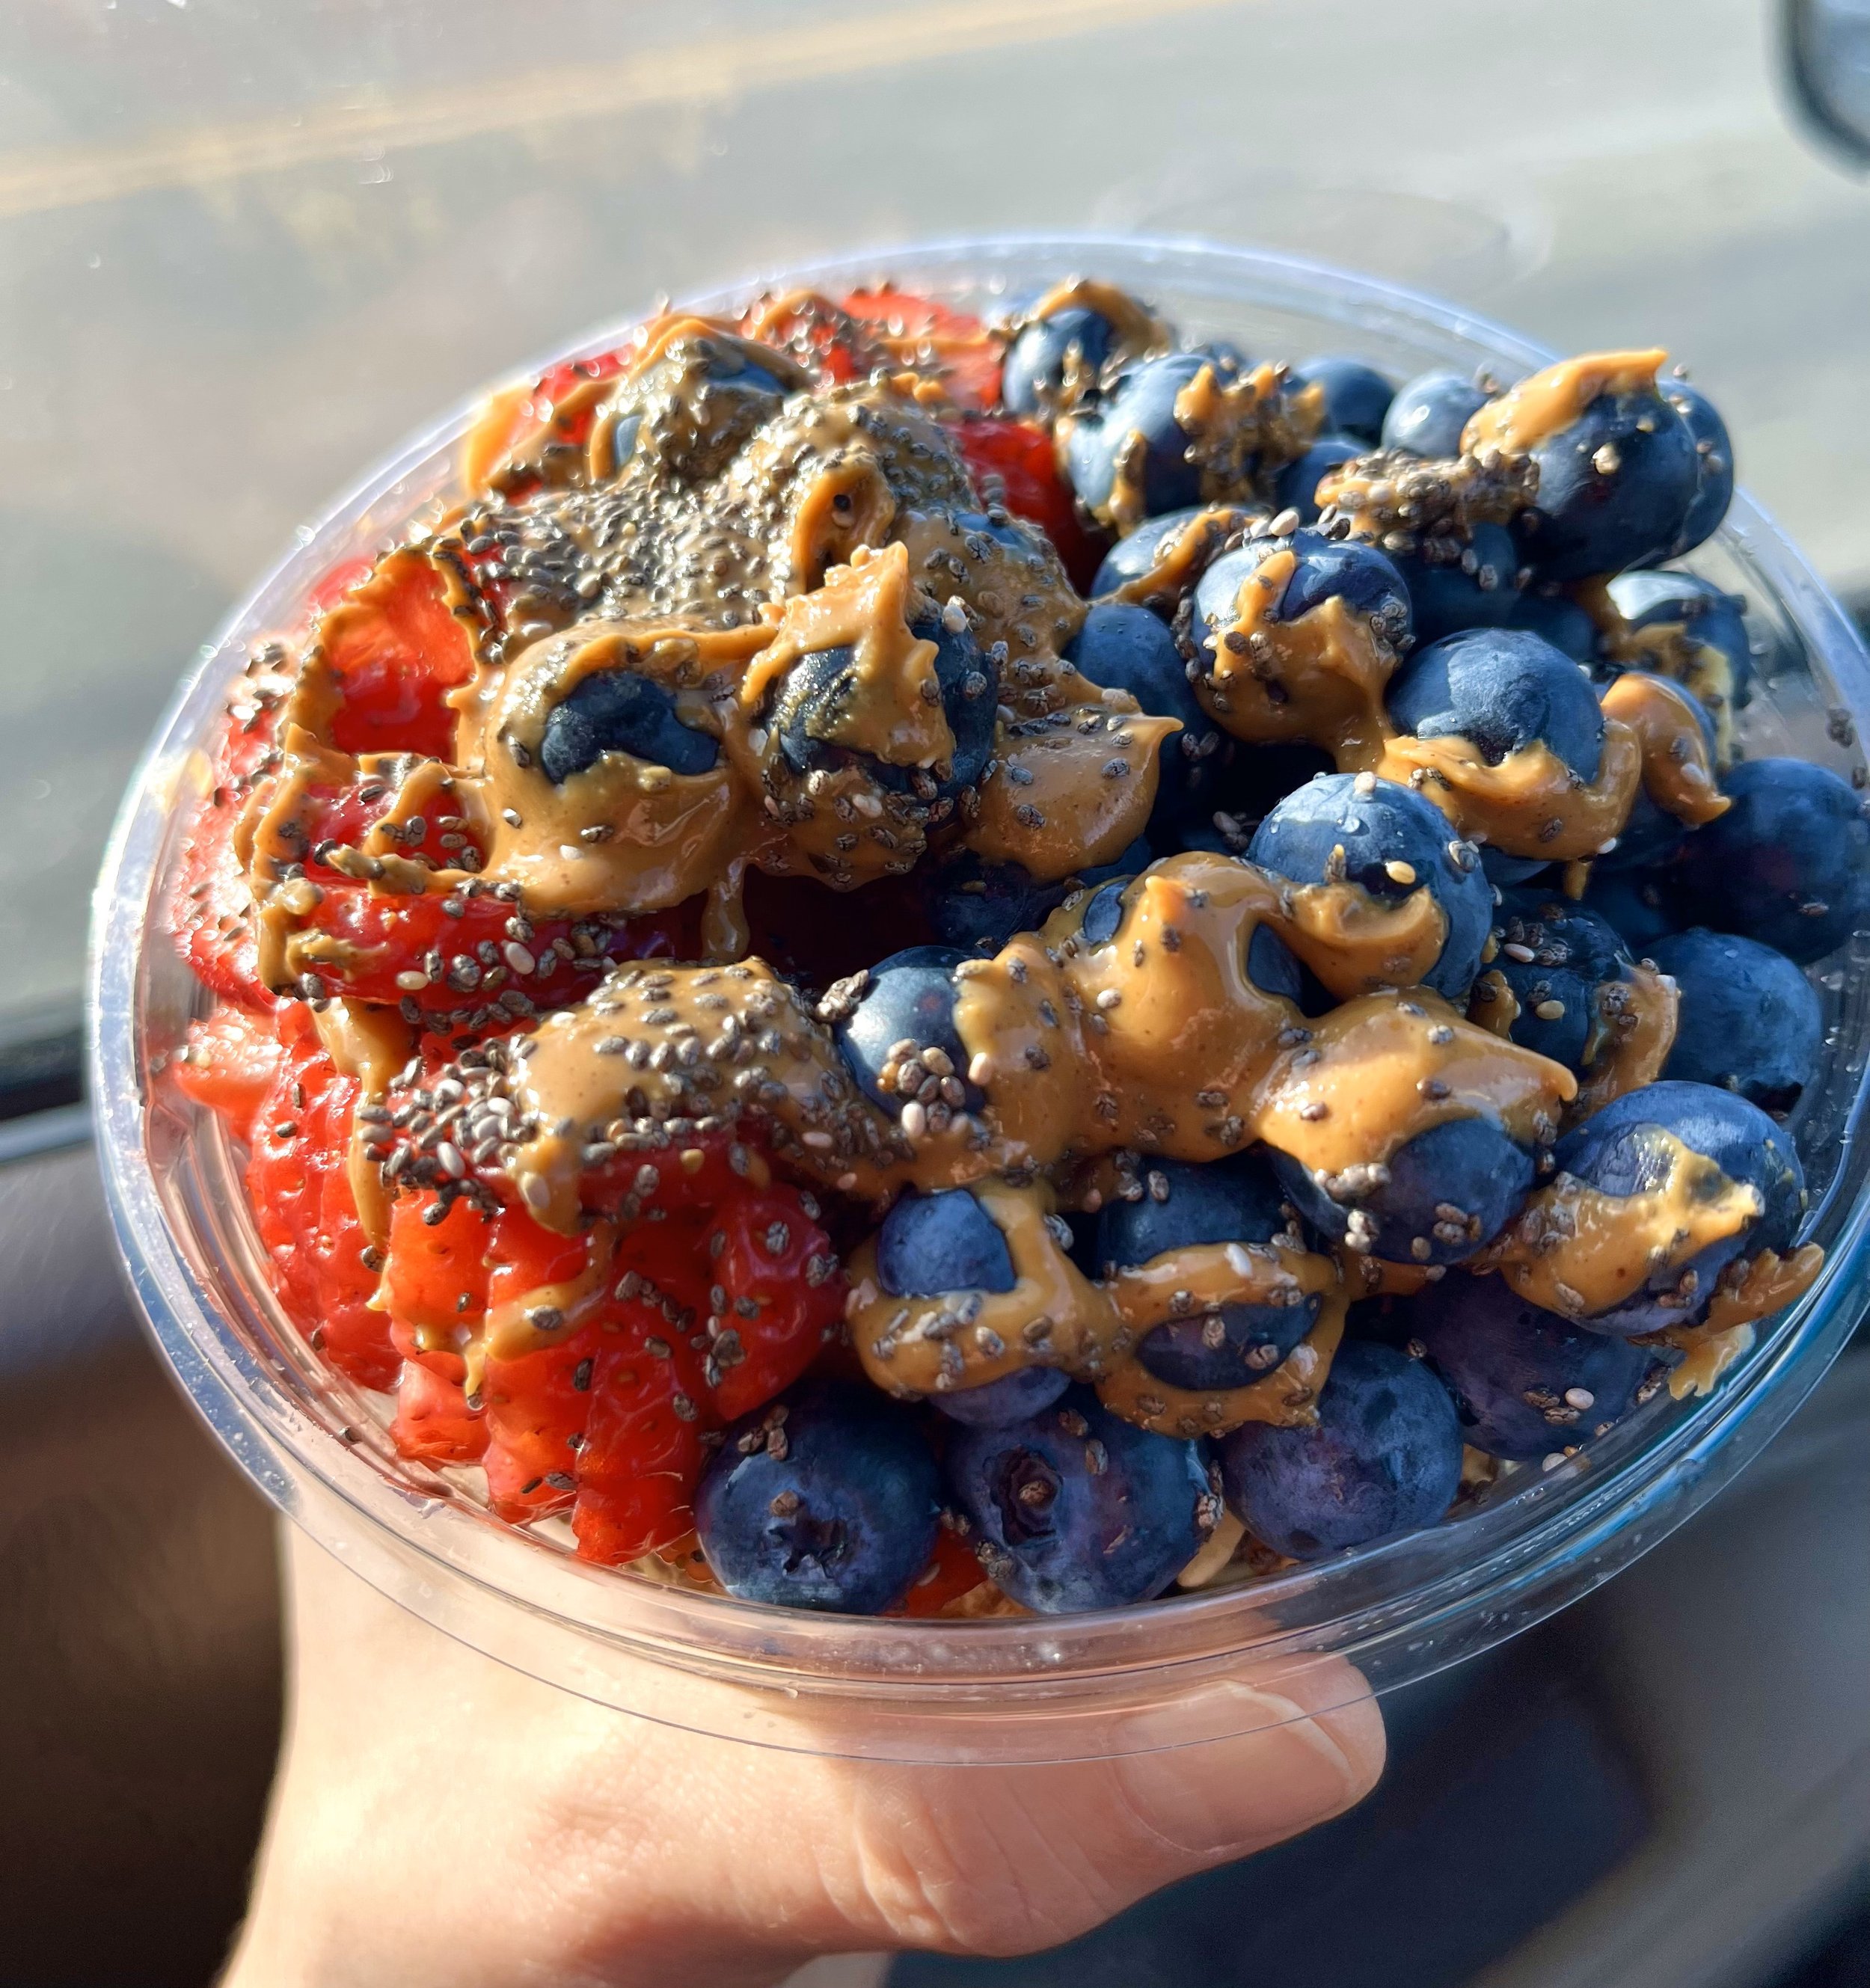 Bay Bowls’ Paraiso Bowl with pitaya, granola, blueberry, strawberry, chia seeds and peanut butter. 